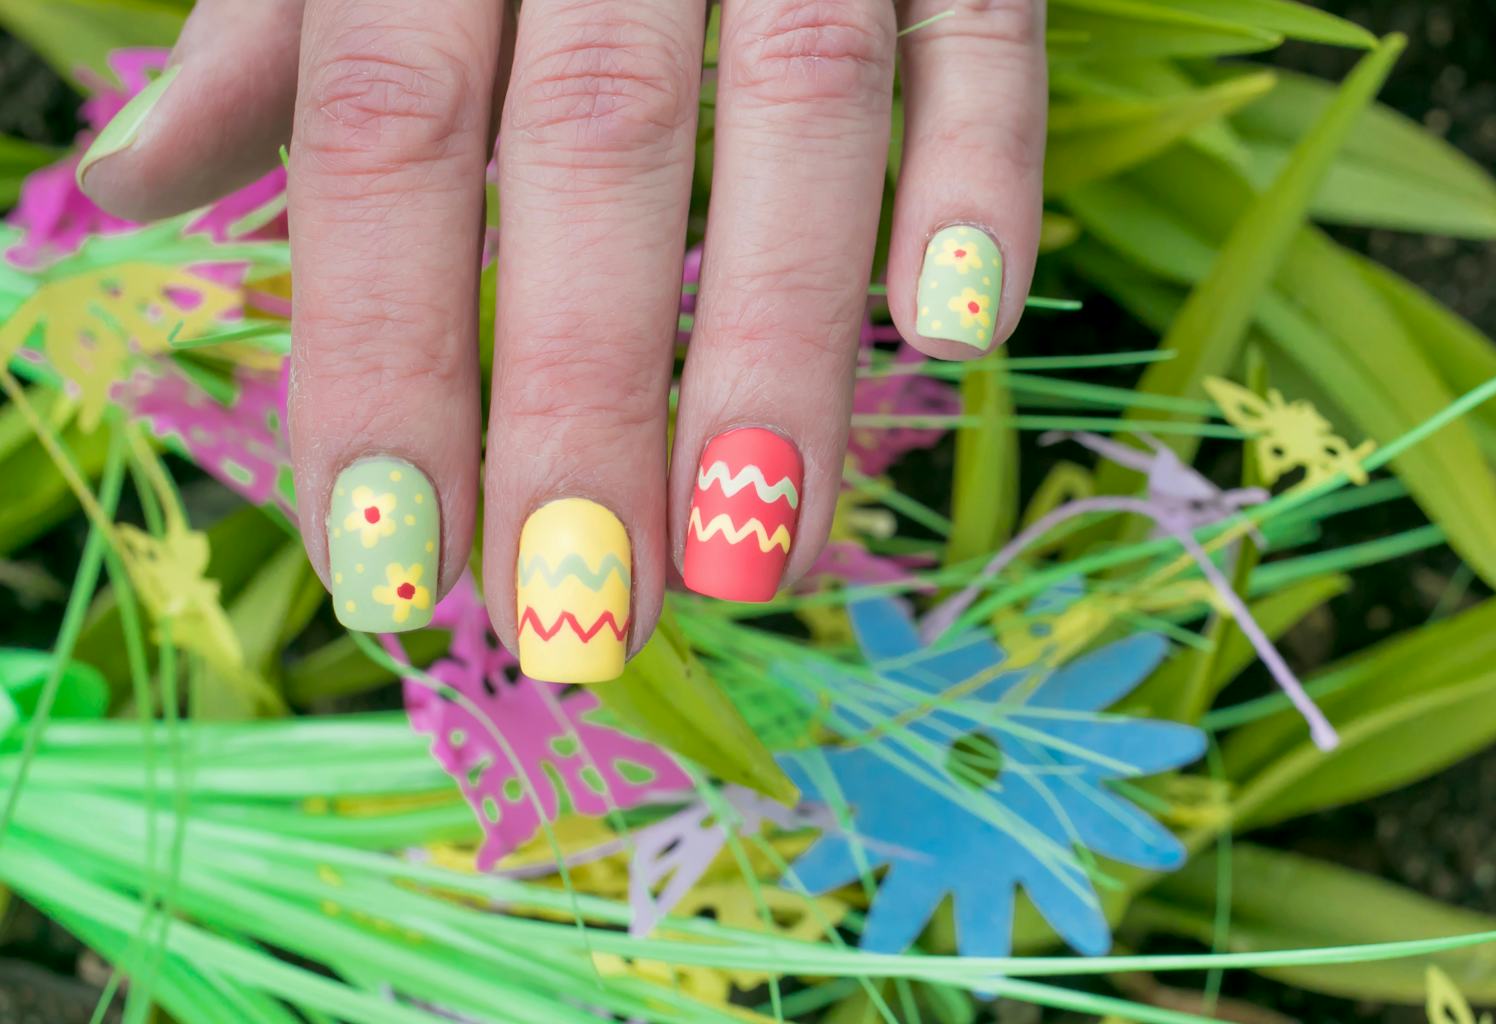 2. Pastel Stiletto Nails for Easter - wide 6